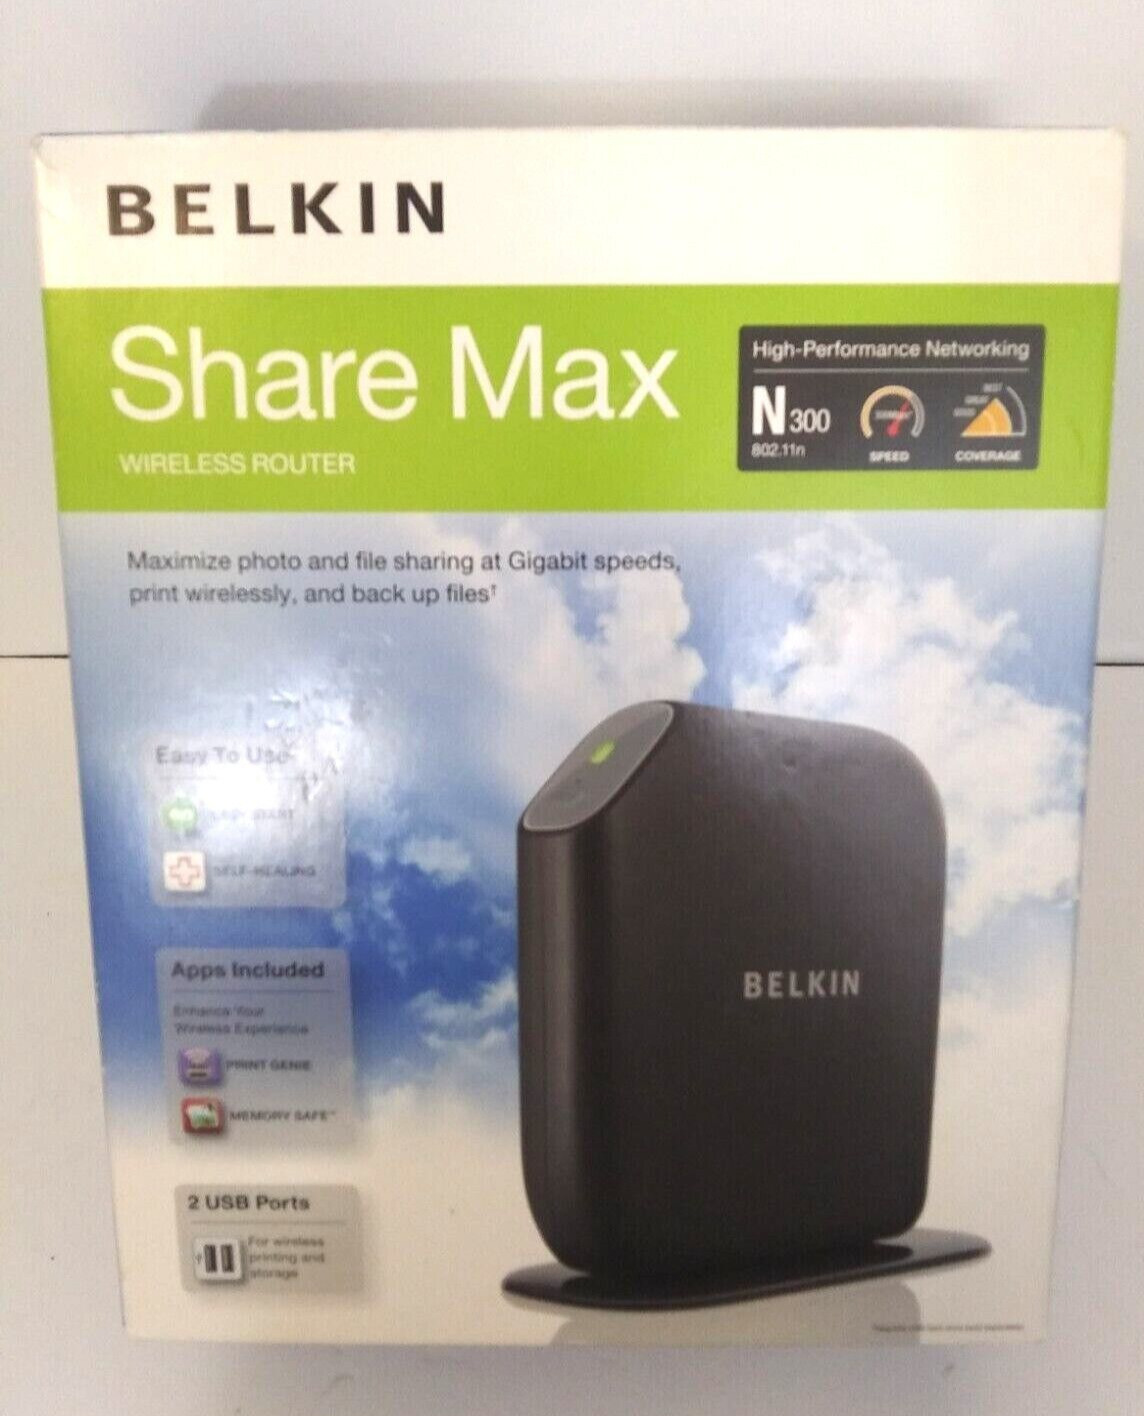 Belkin Share Max  N300 Wireless Router Black 2 USB Ports For Wireless Printing 